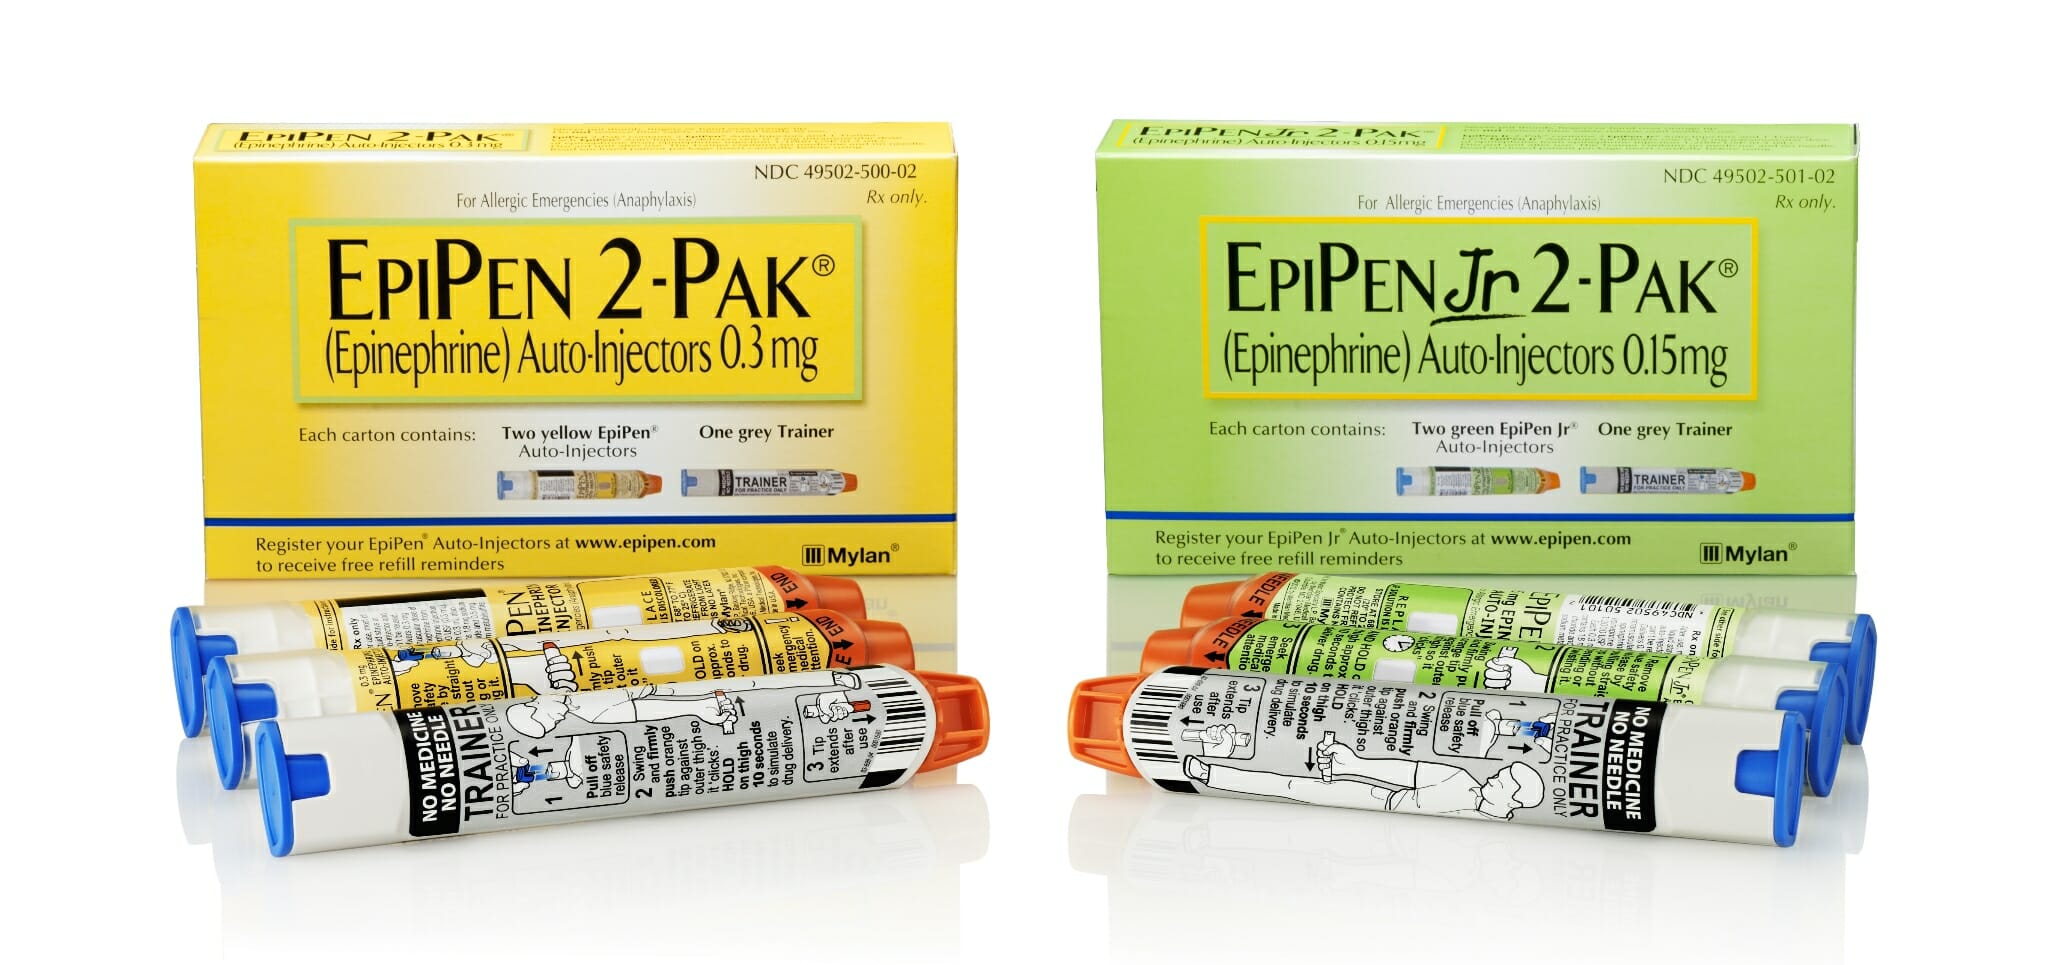 Timeline of a crisis: How Mylan responded to the EpiPen controversy